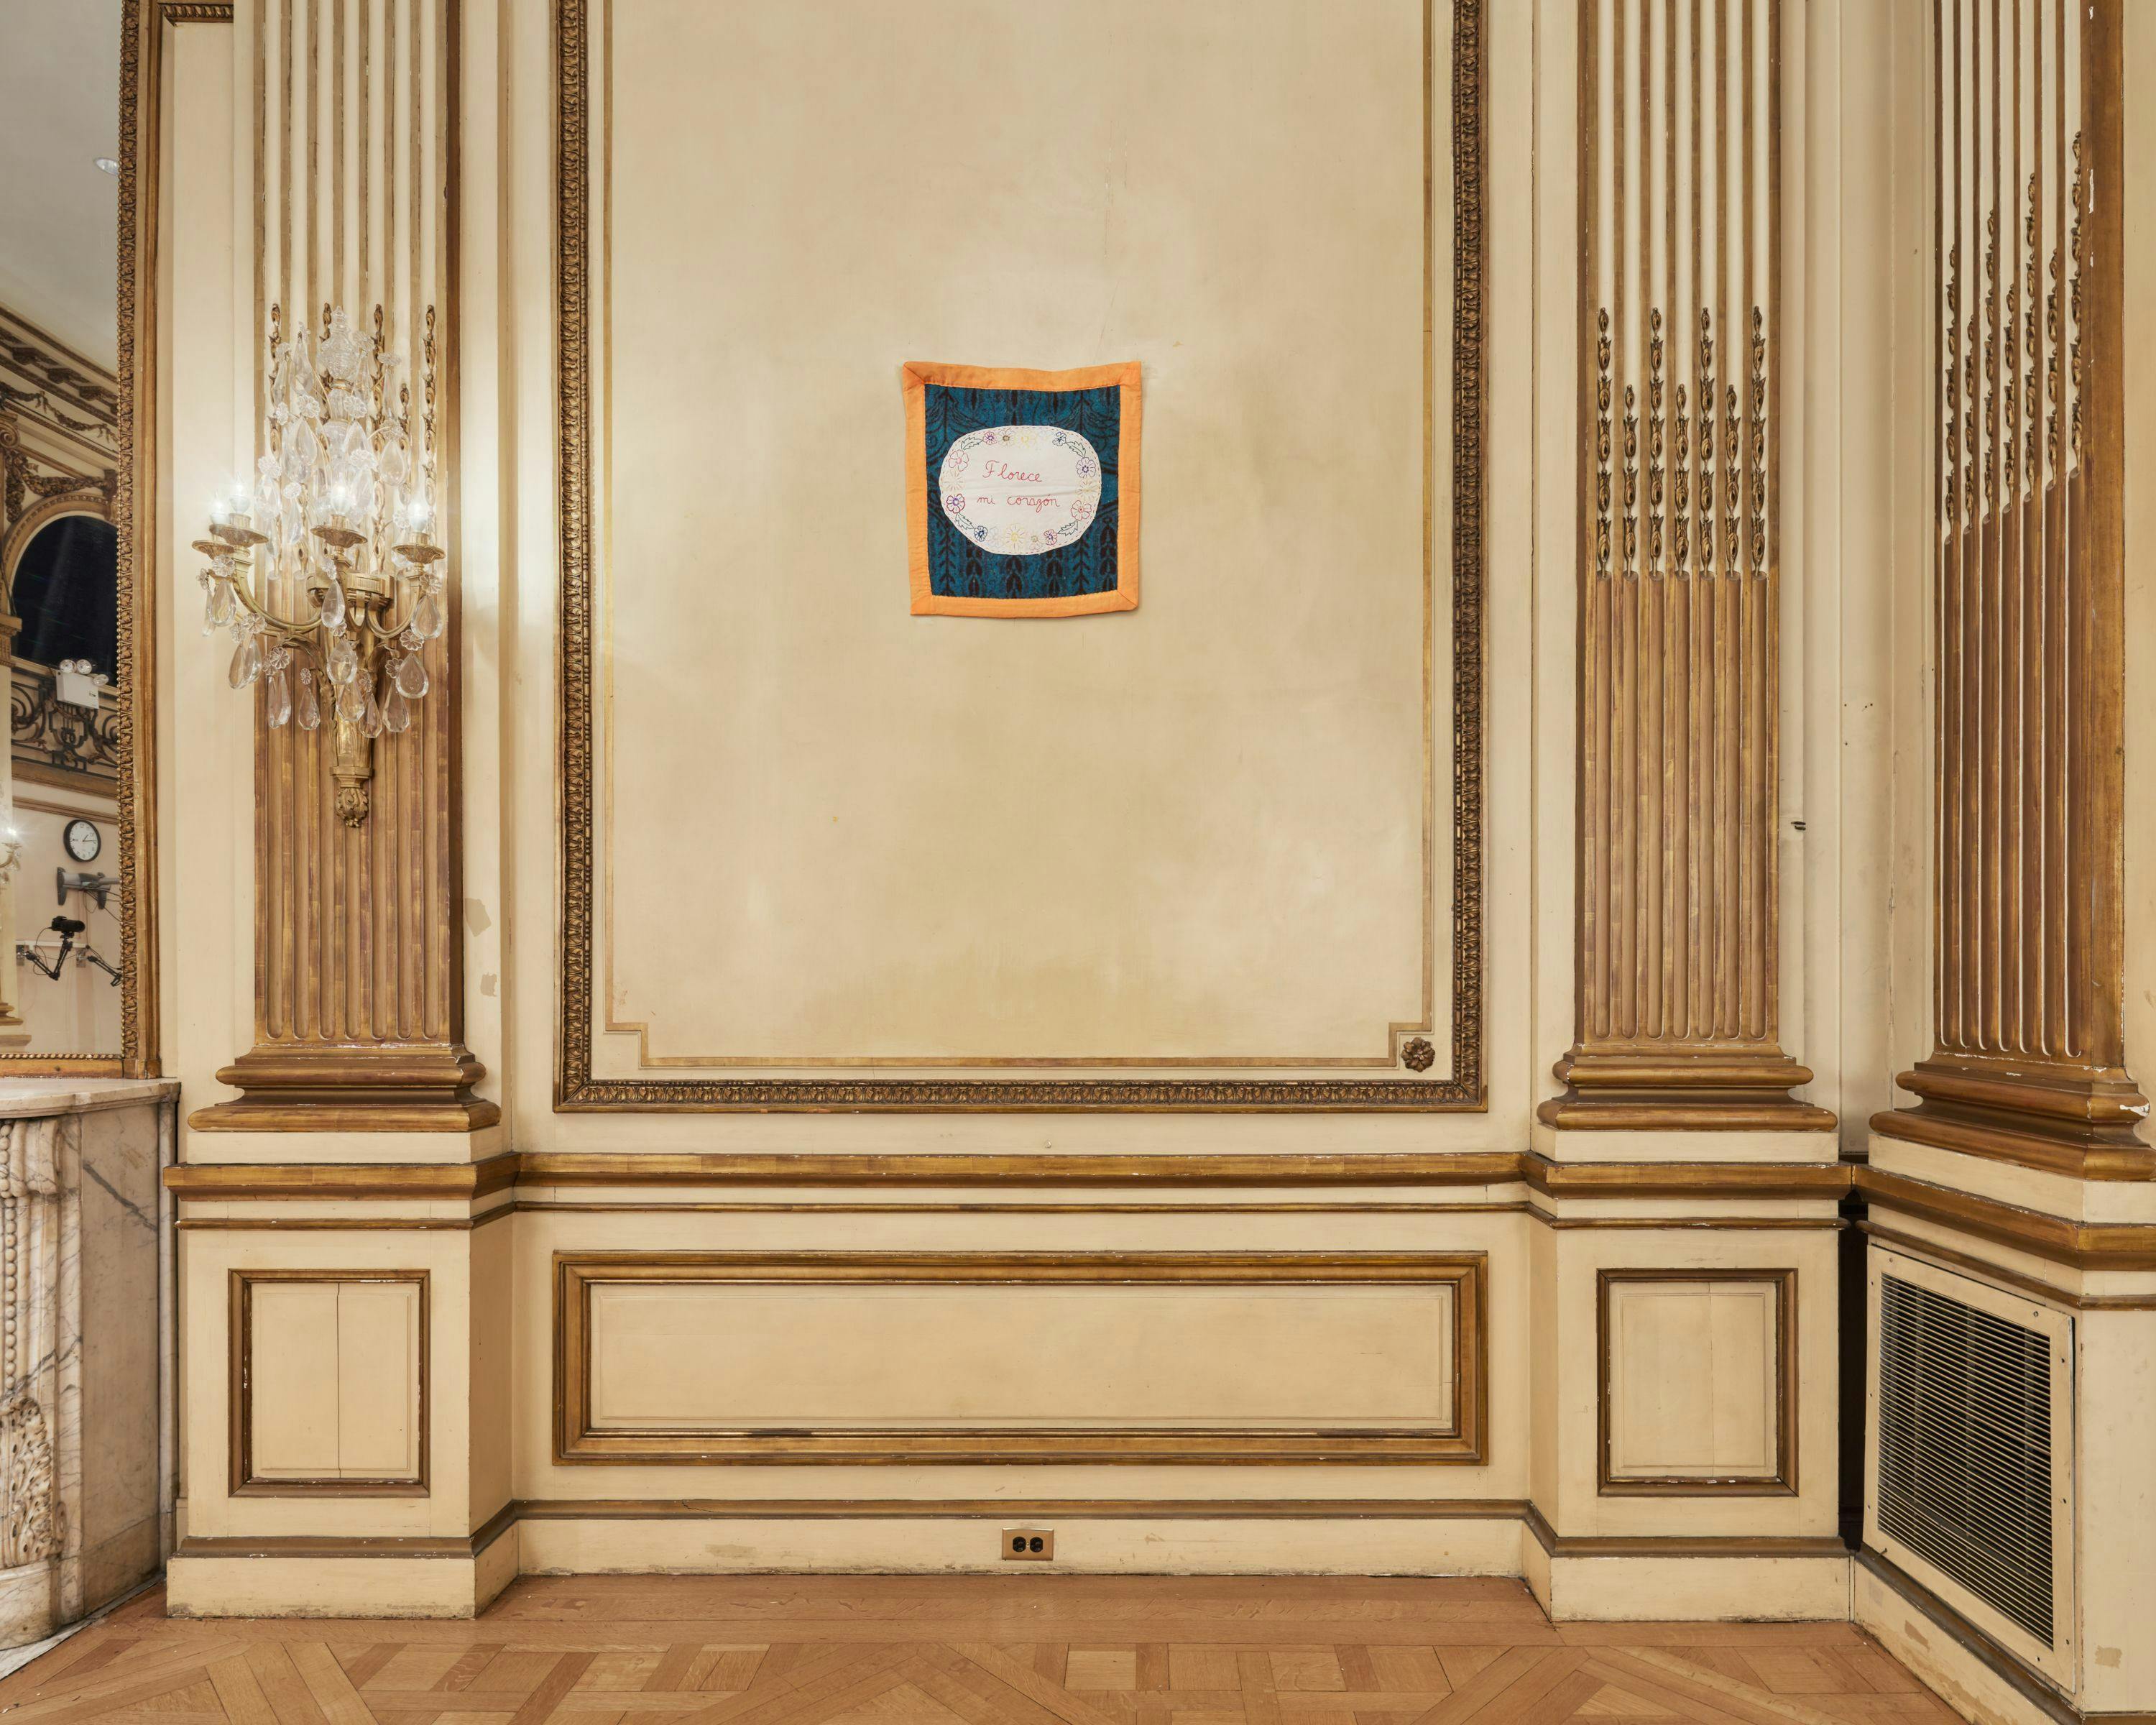 Installation view of the exhibition with artwork framed by wall moldings